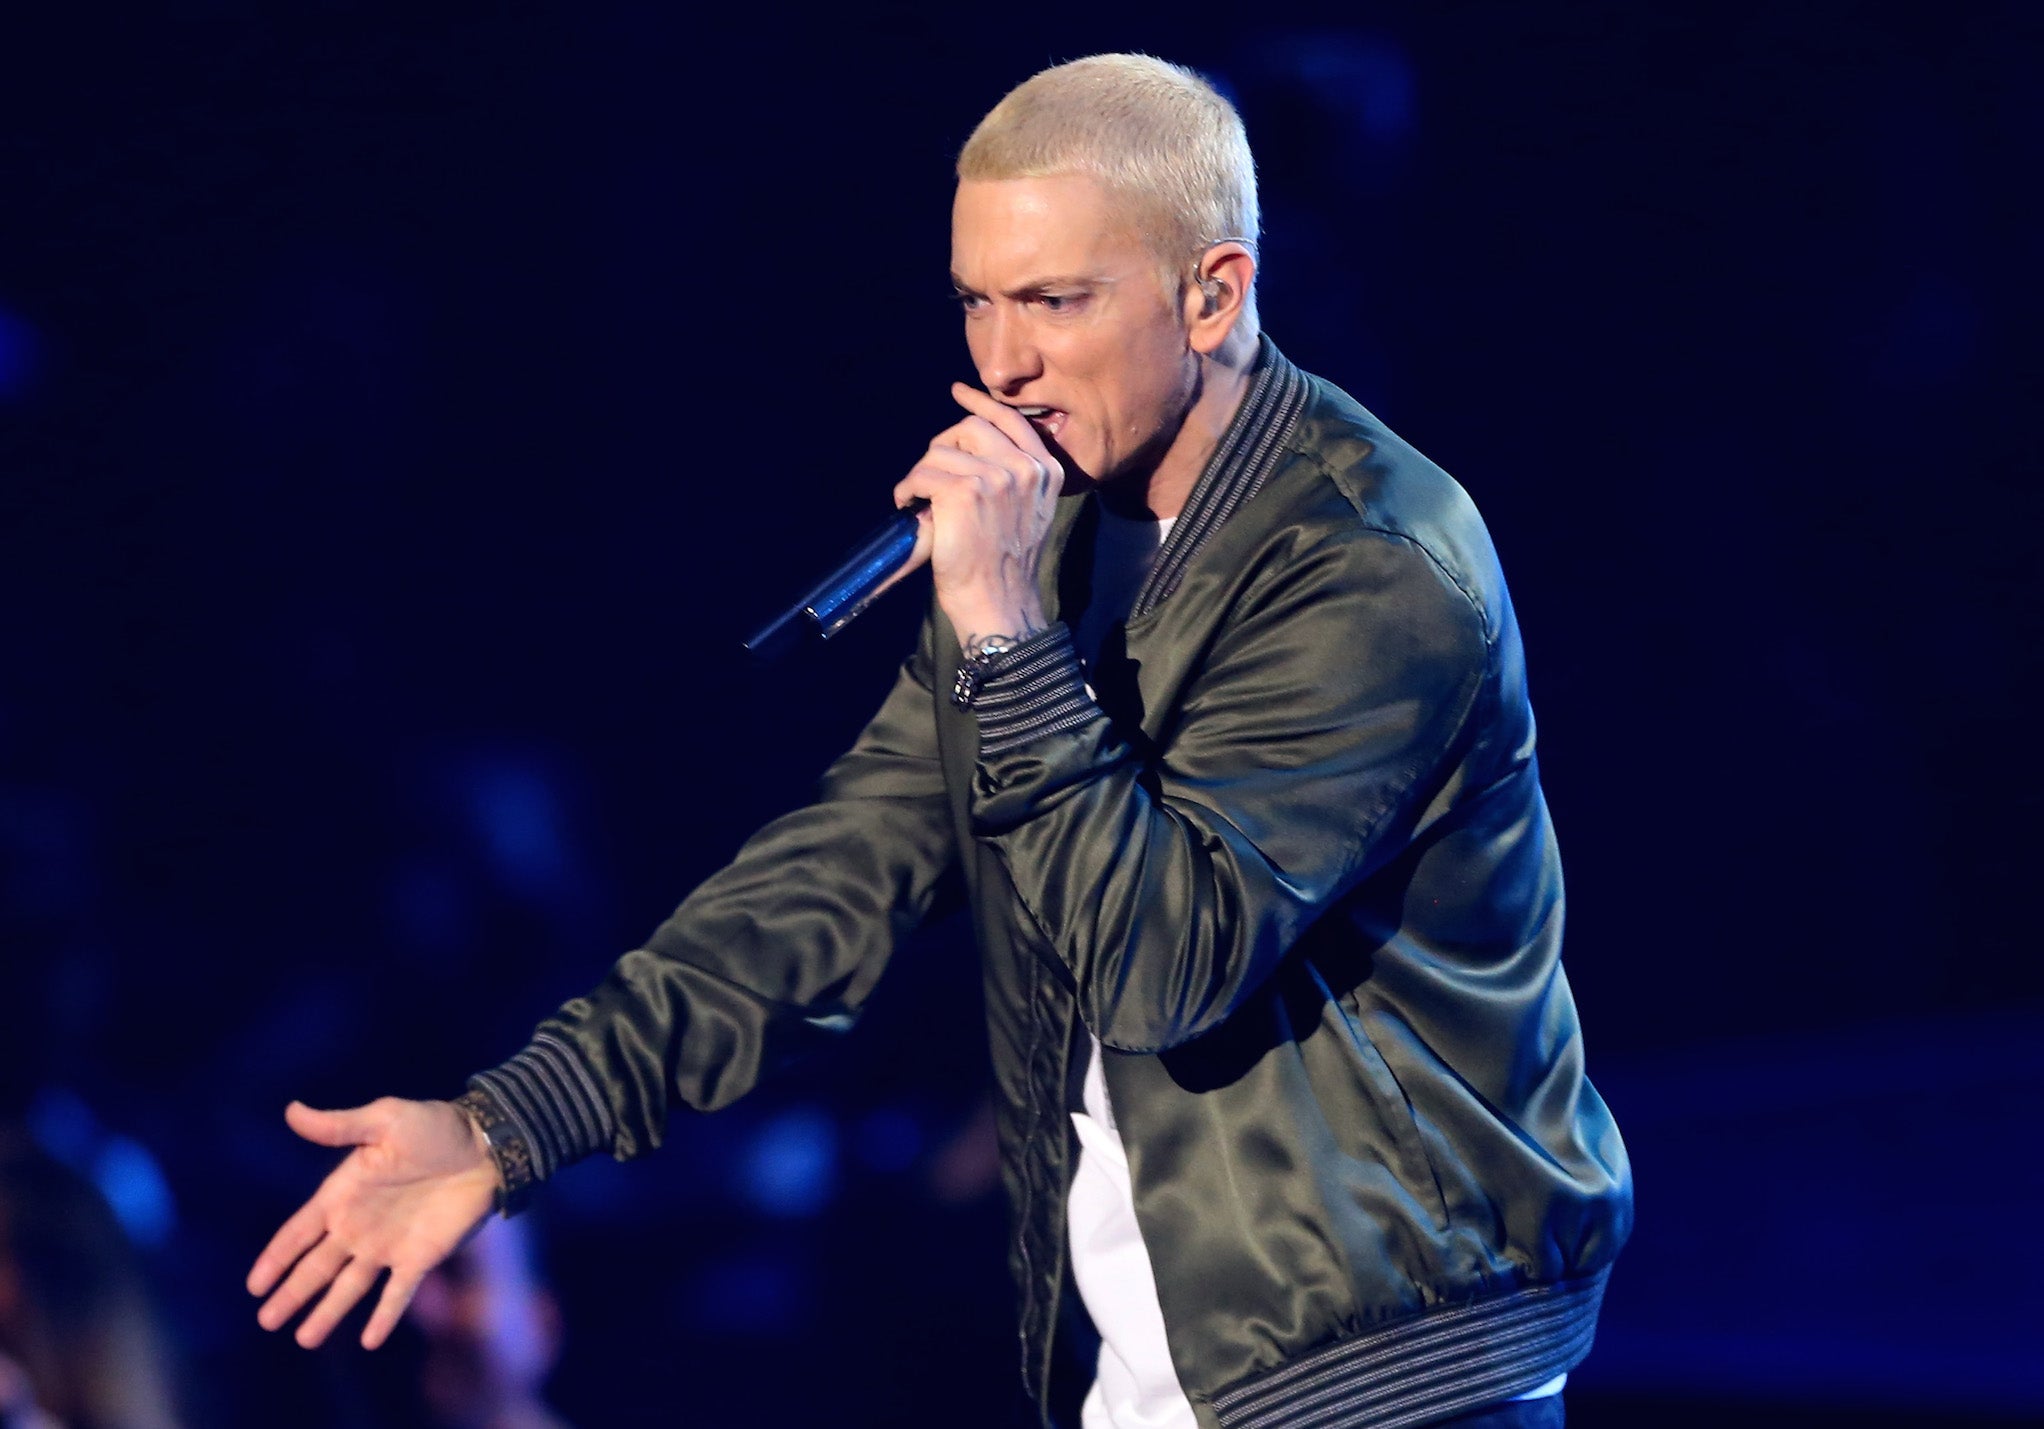 Eminem performs onstage at the 2014 MTV Movie Awards in Los Angeles.